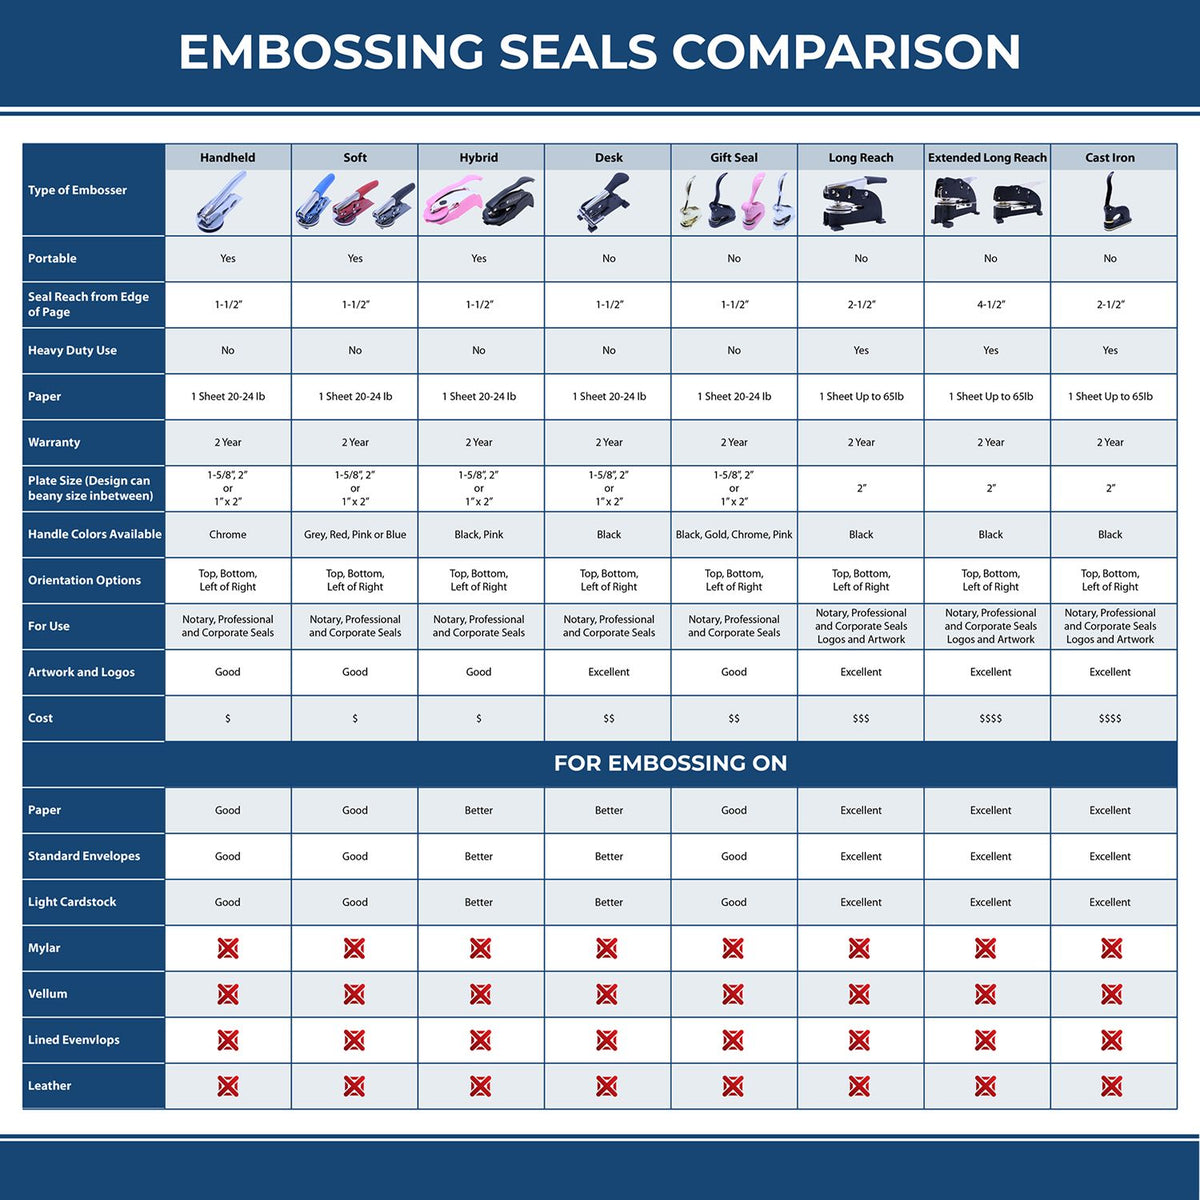 A comparison chart for the different types of mount models available for the Nebraska Desk Architect Embossing Seal.